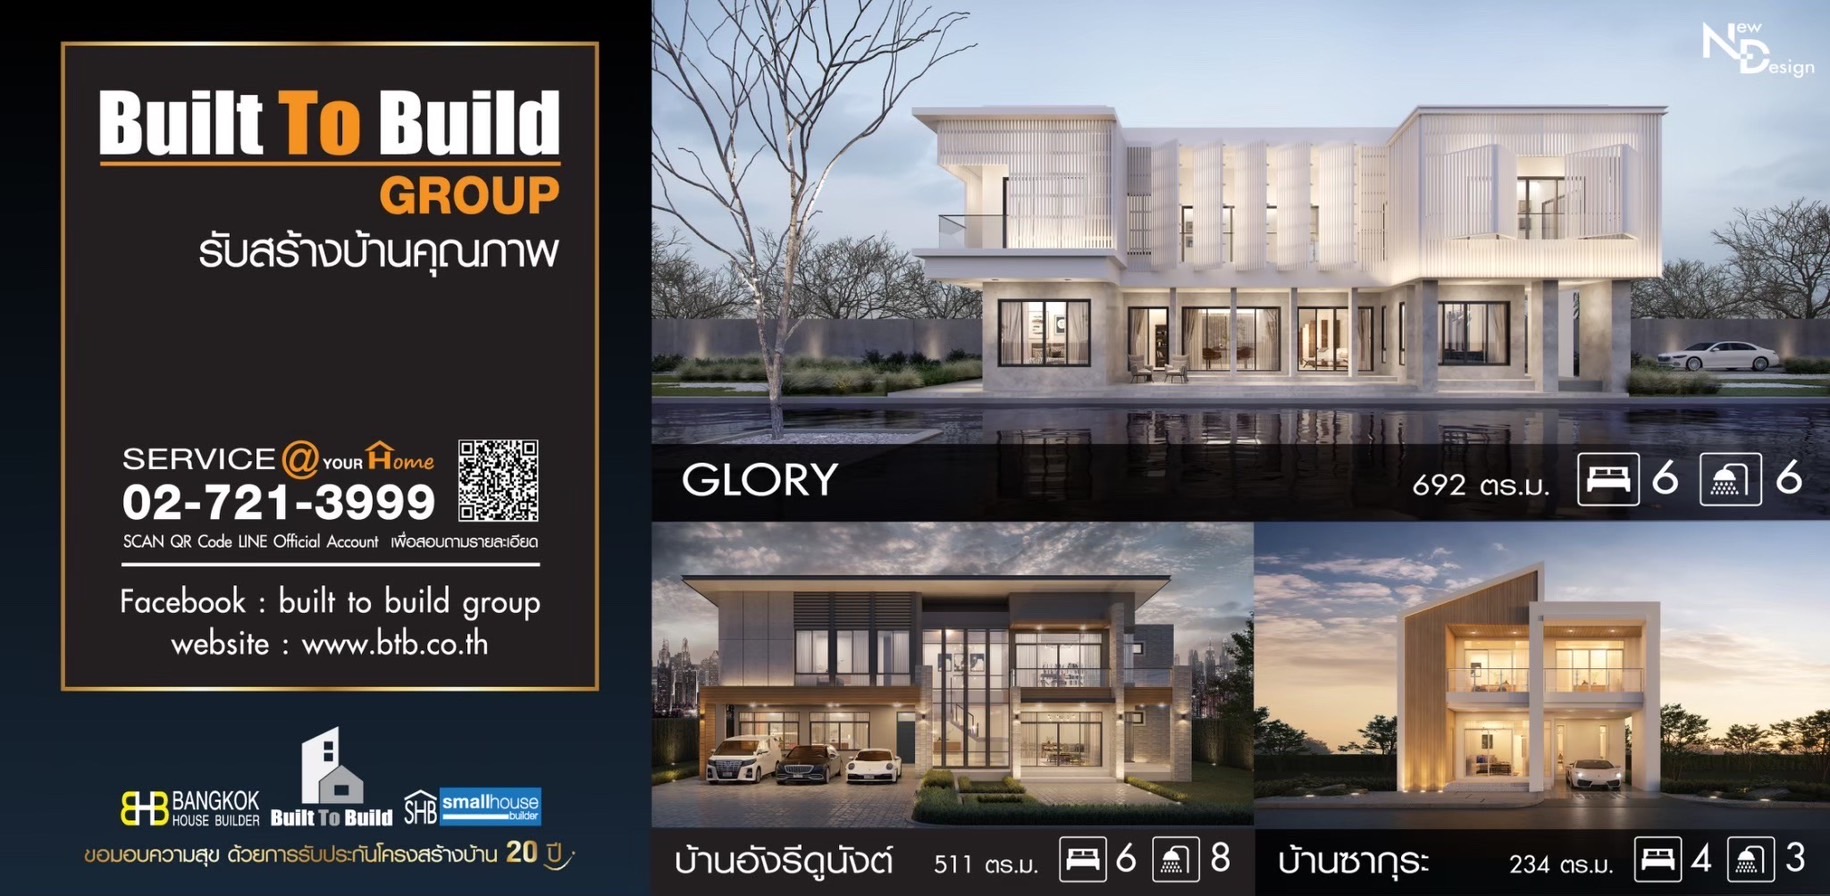 Built To Build Group - 1/03/21 - A1